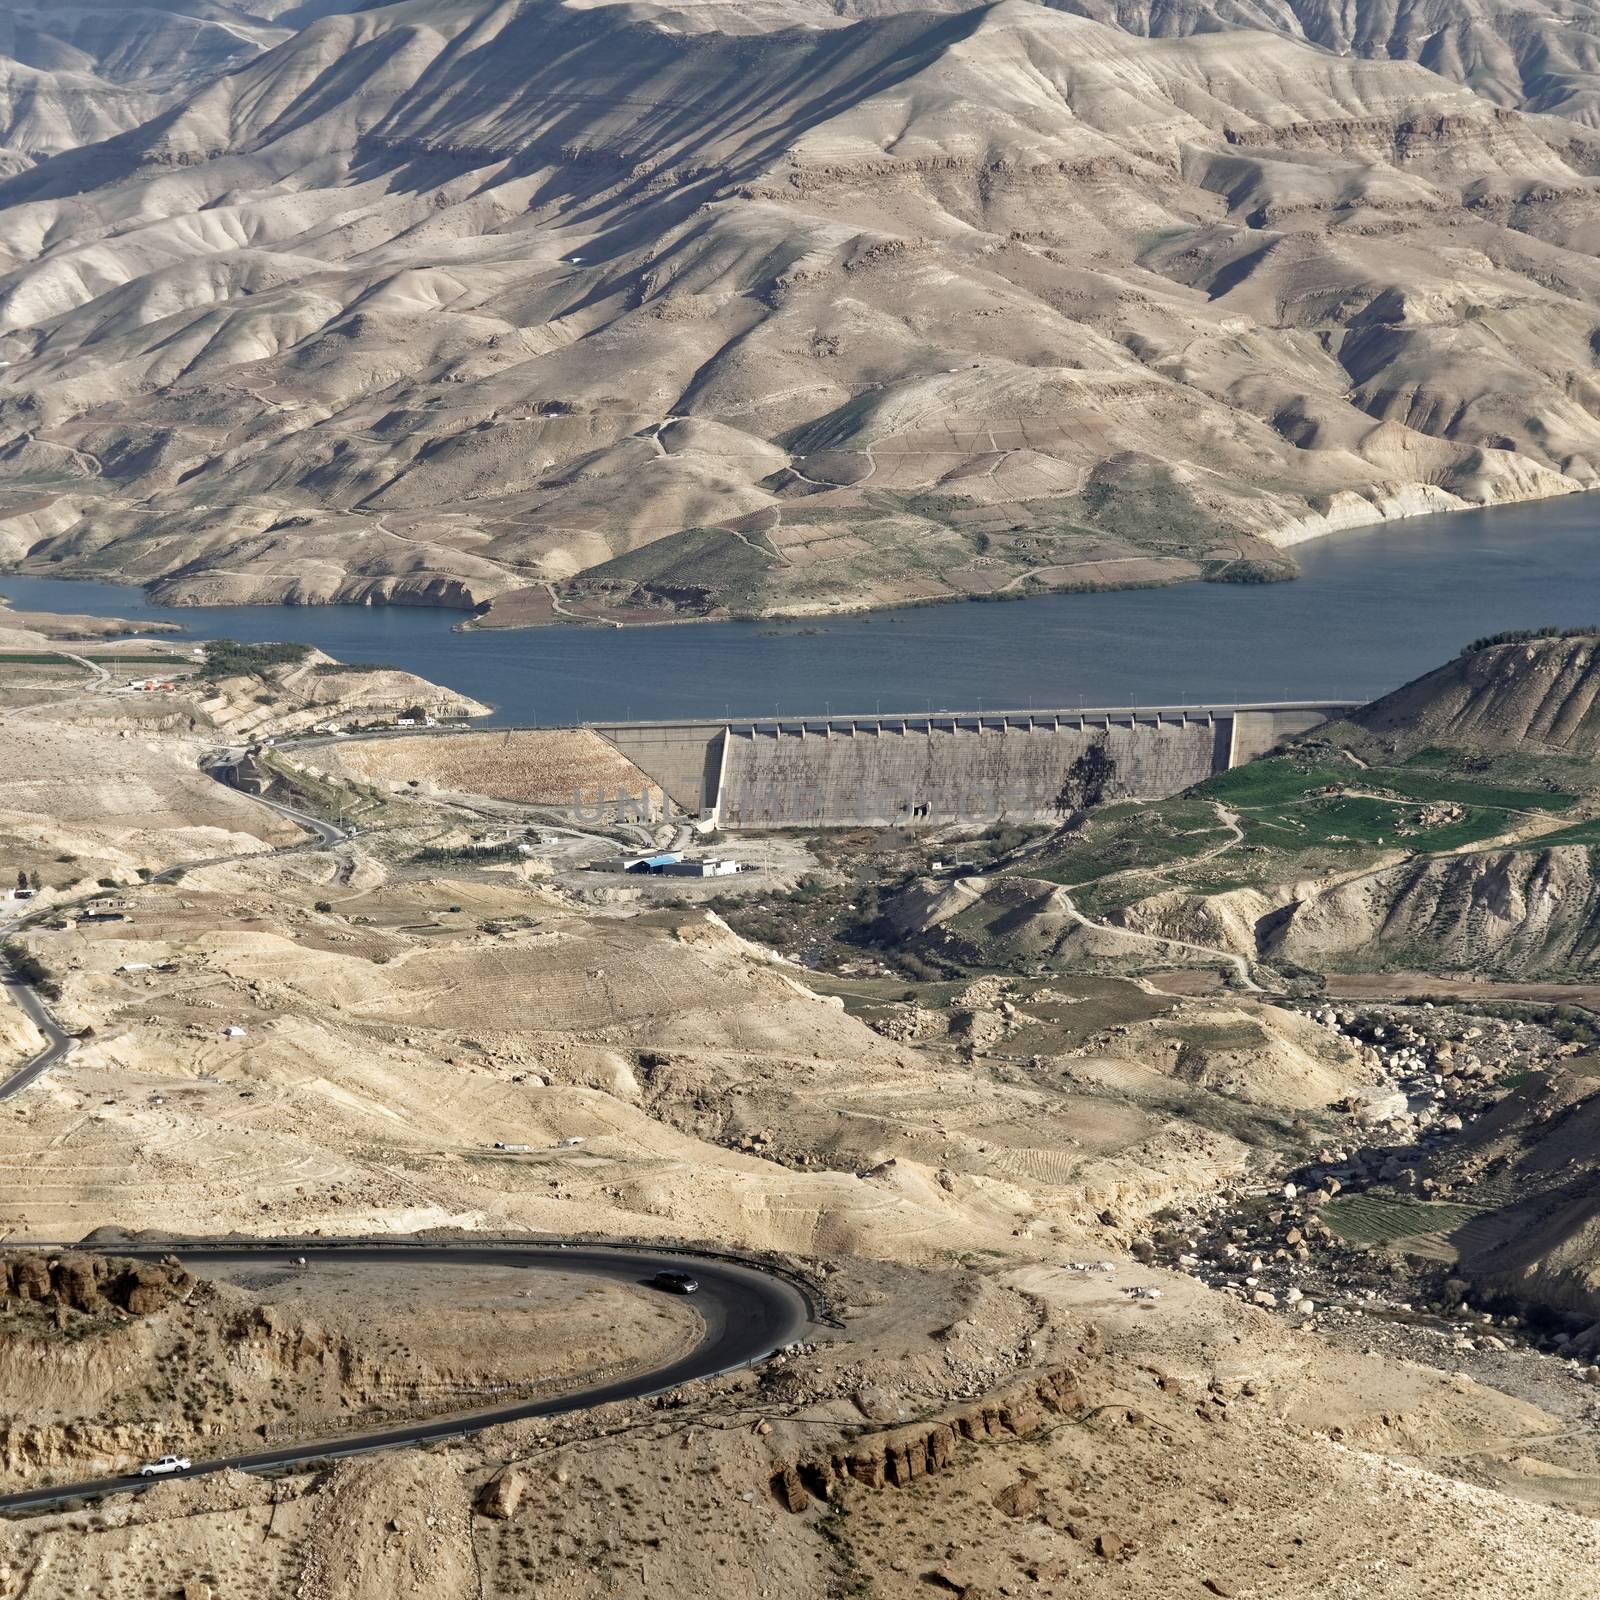 View of the dam of the Wadi Mujib reservoir from the land side by geogif